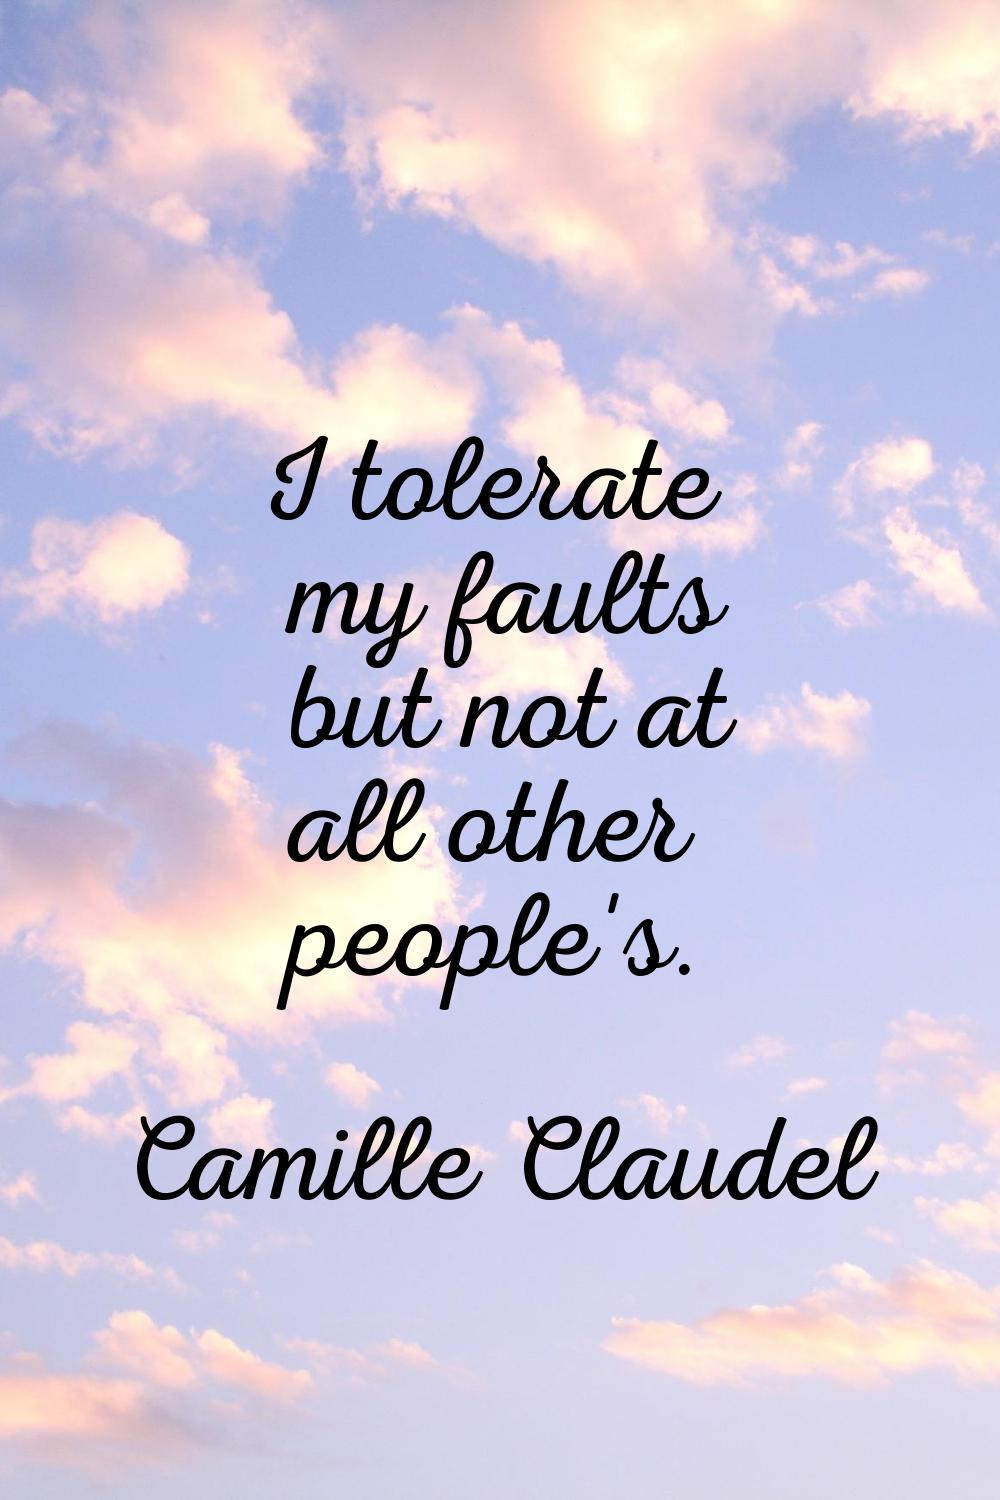 I tolerate my faults but not at all other people's.